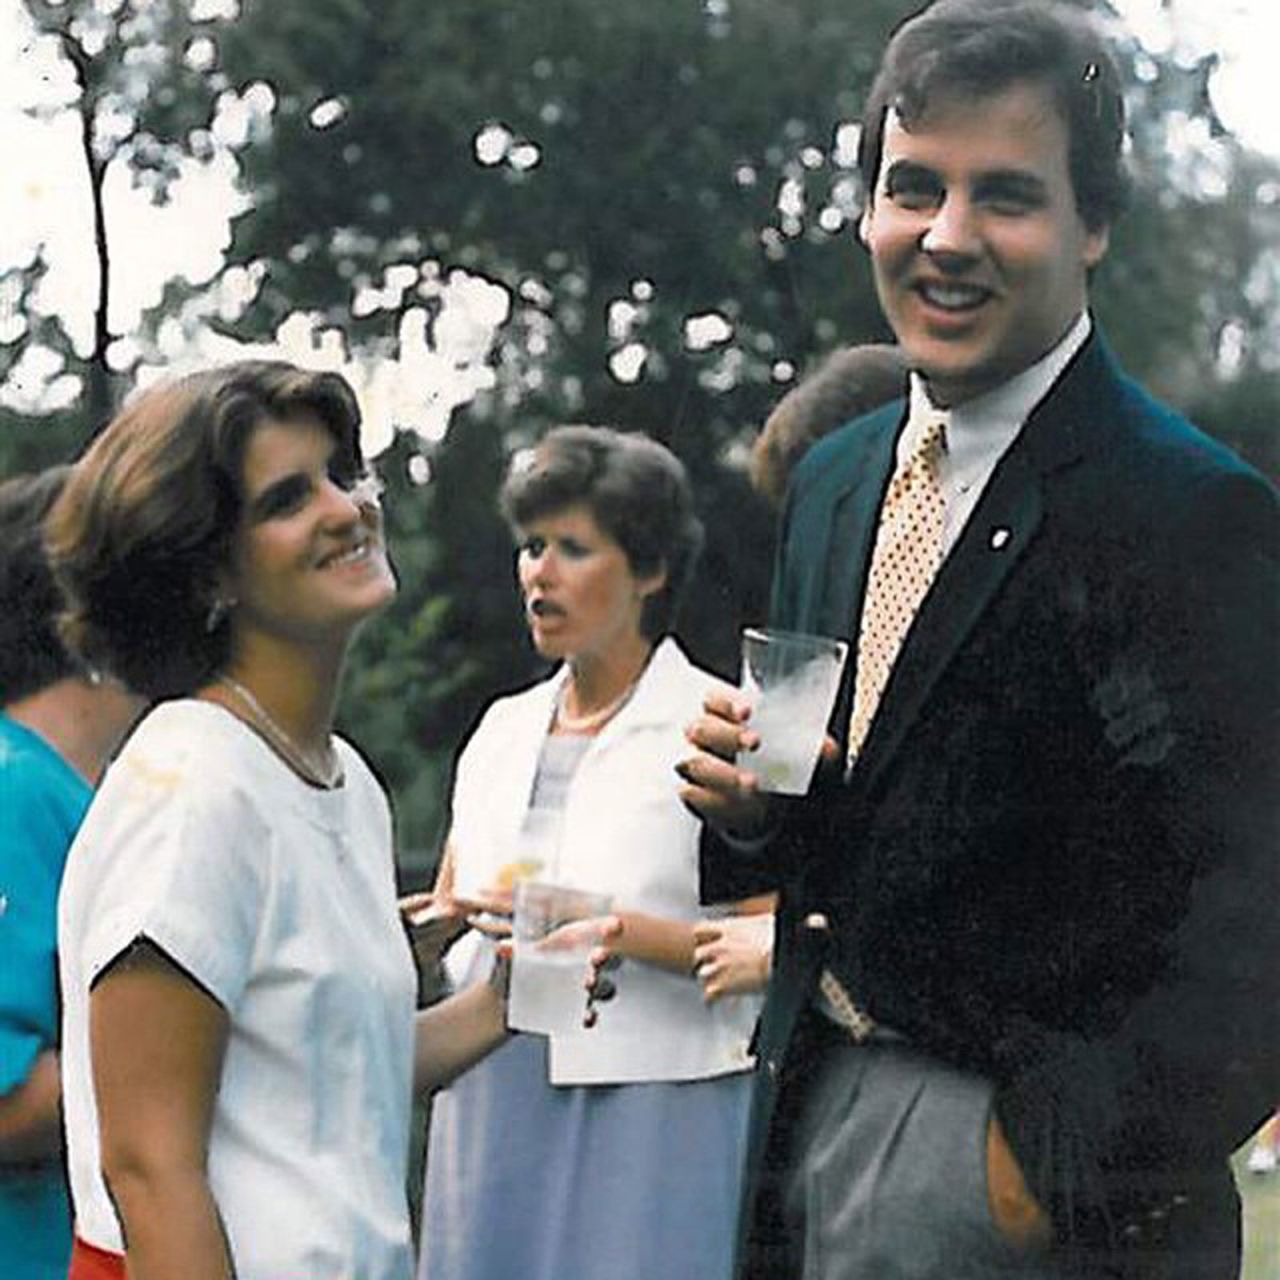 Christie met his wife, Mary Pat, at the University of Delaware. Christie <a href="https://www.instagram.com/p/z2lVyuzeo2/" target="_blank" target="_blank">posted this picture</a> of them together in 2015, 30 years after it was taken. The two were married in 1986, and they have four children.